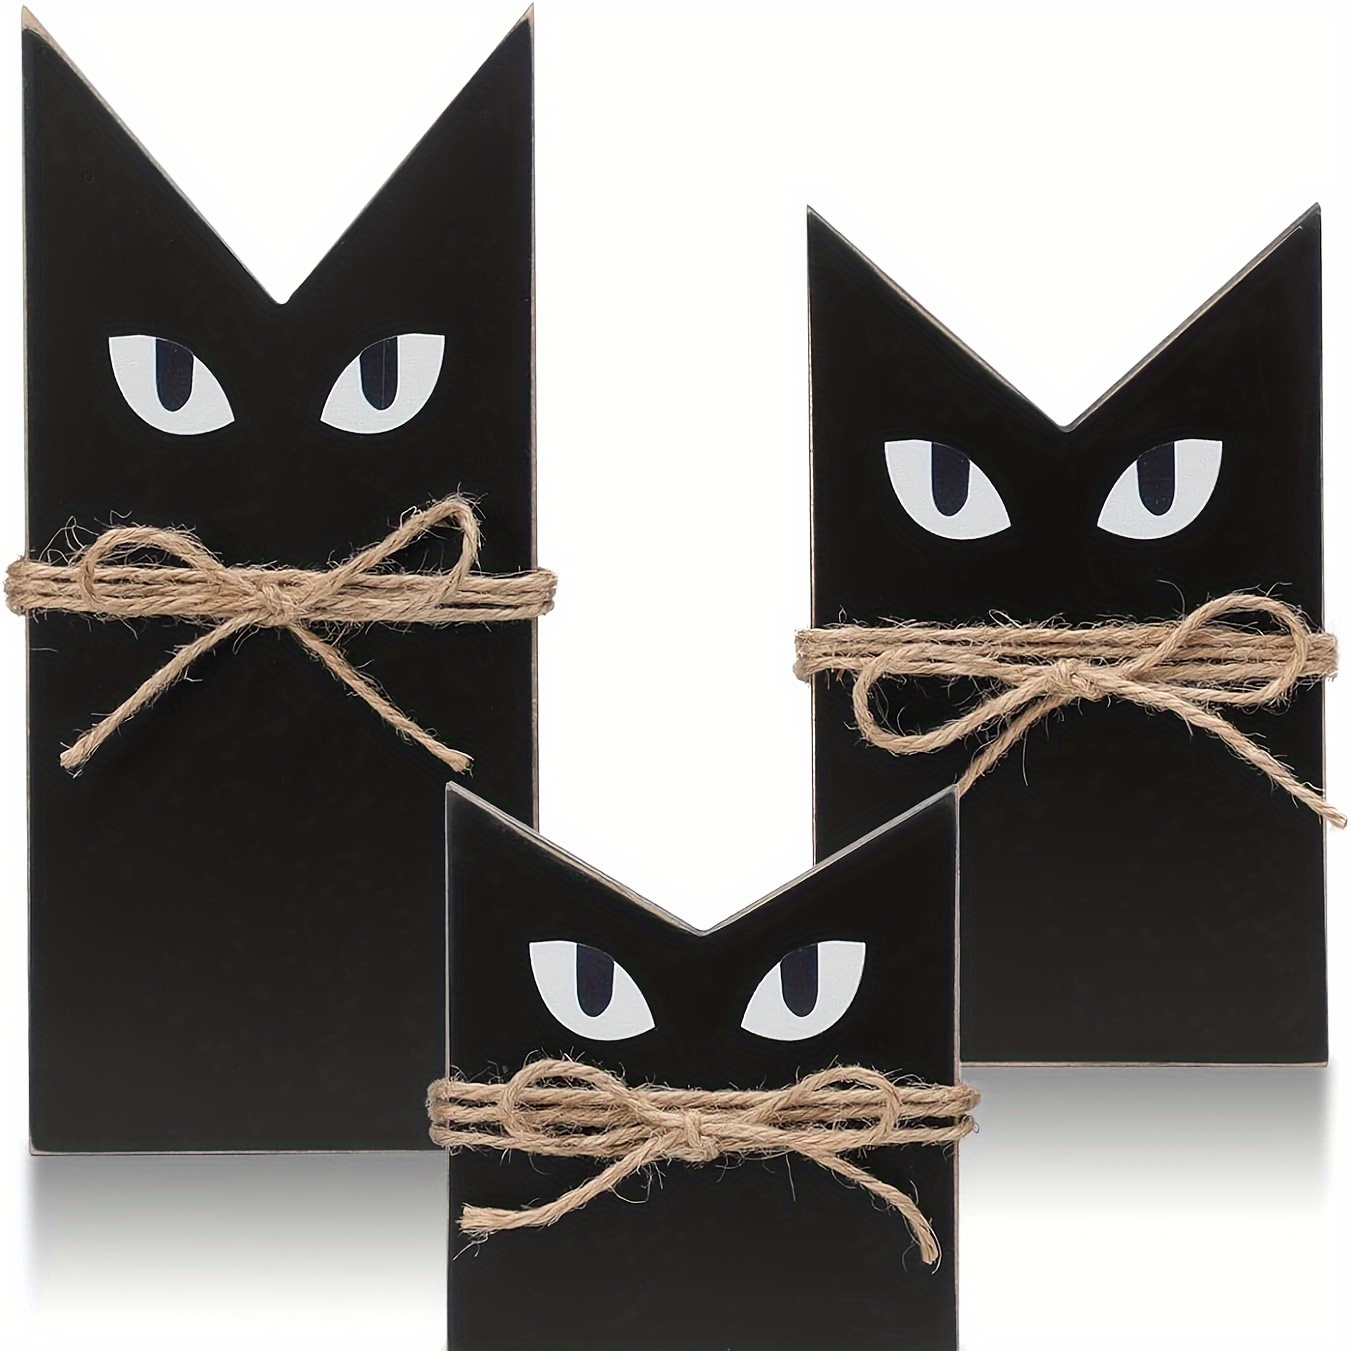 

3-piece Farmhouse Halloween Decor Set - Wooden Black Cat & Ghost Themes, Perfect For Home, Bedroom, Living Room - Autumn & Holiday Crafts, Ideal For Birthday & Housewarming Gifts